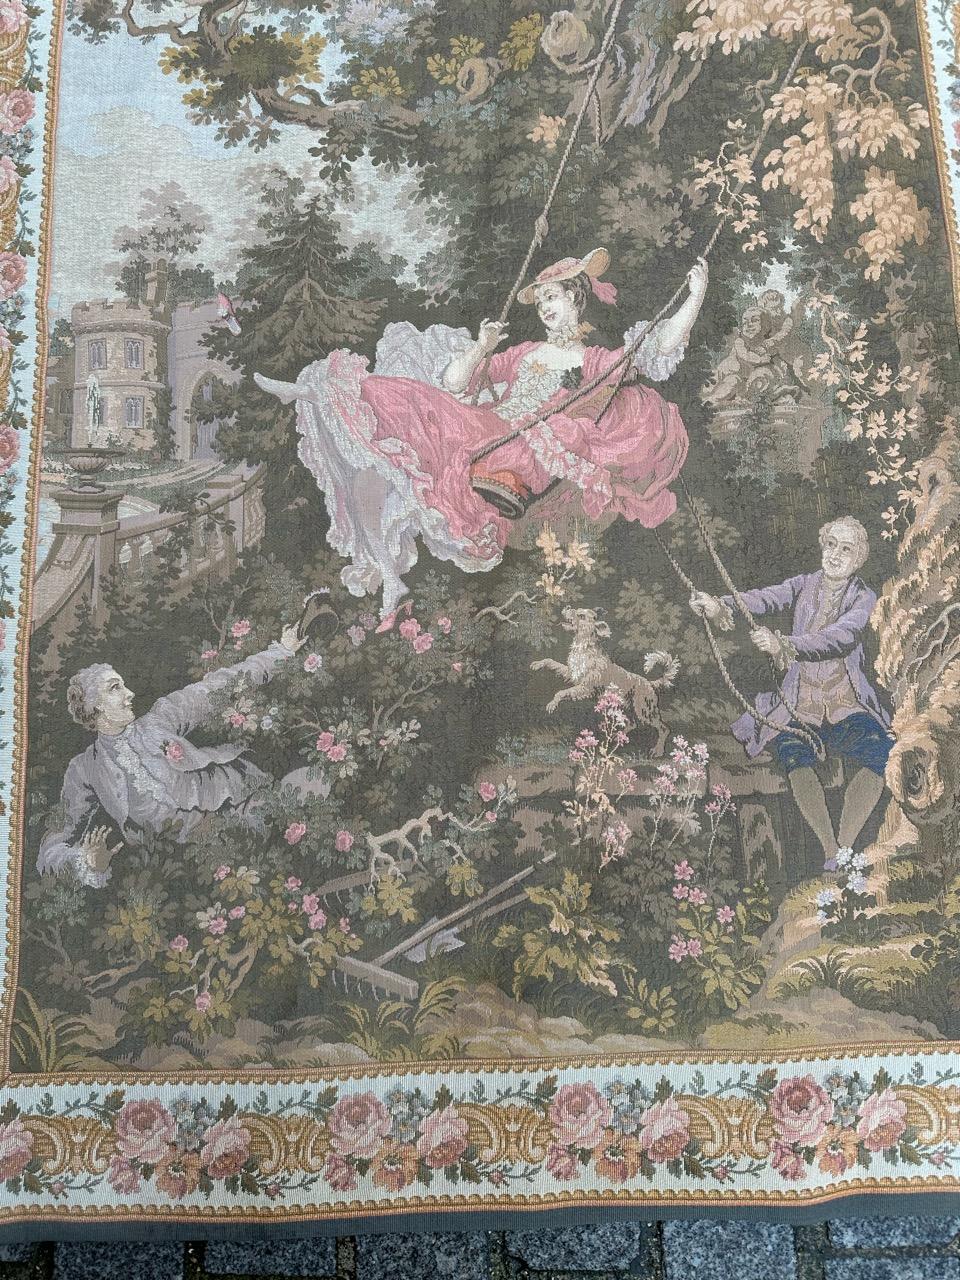 Very pretty mid century french Aubusson style tapestry with beautiful design from the painter Fragonard.

